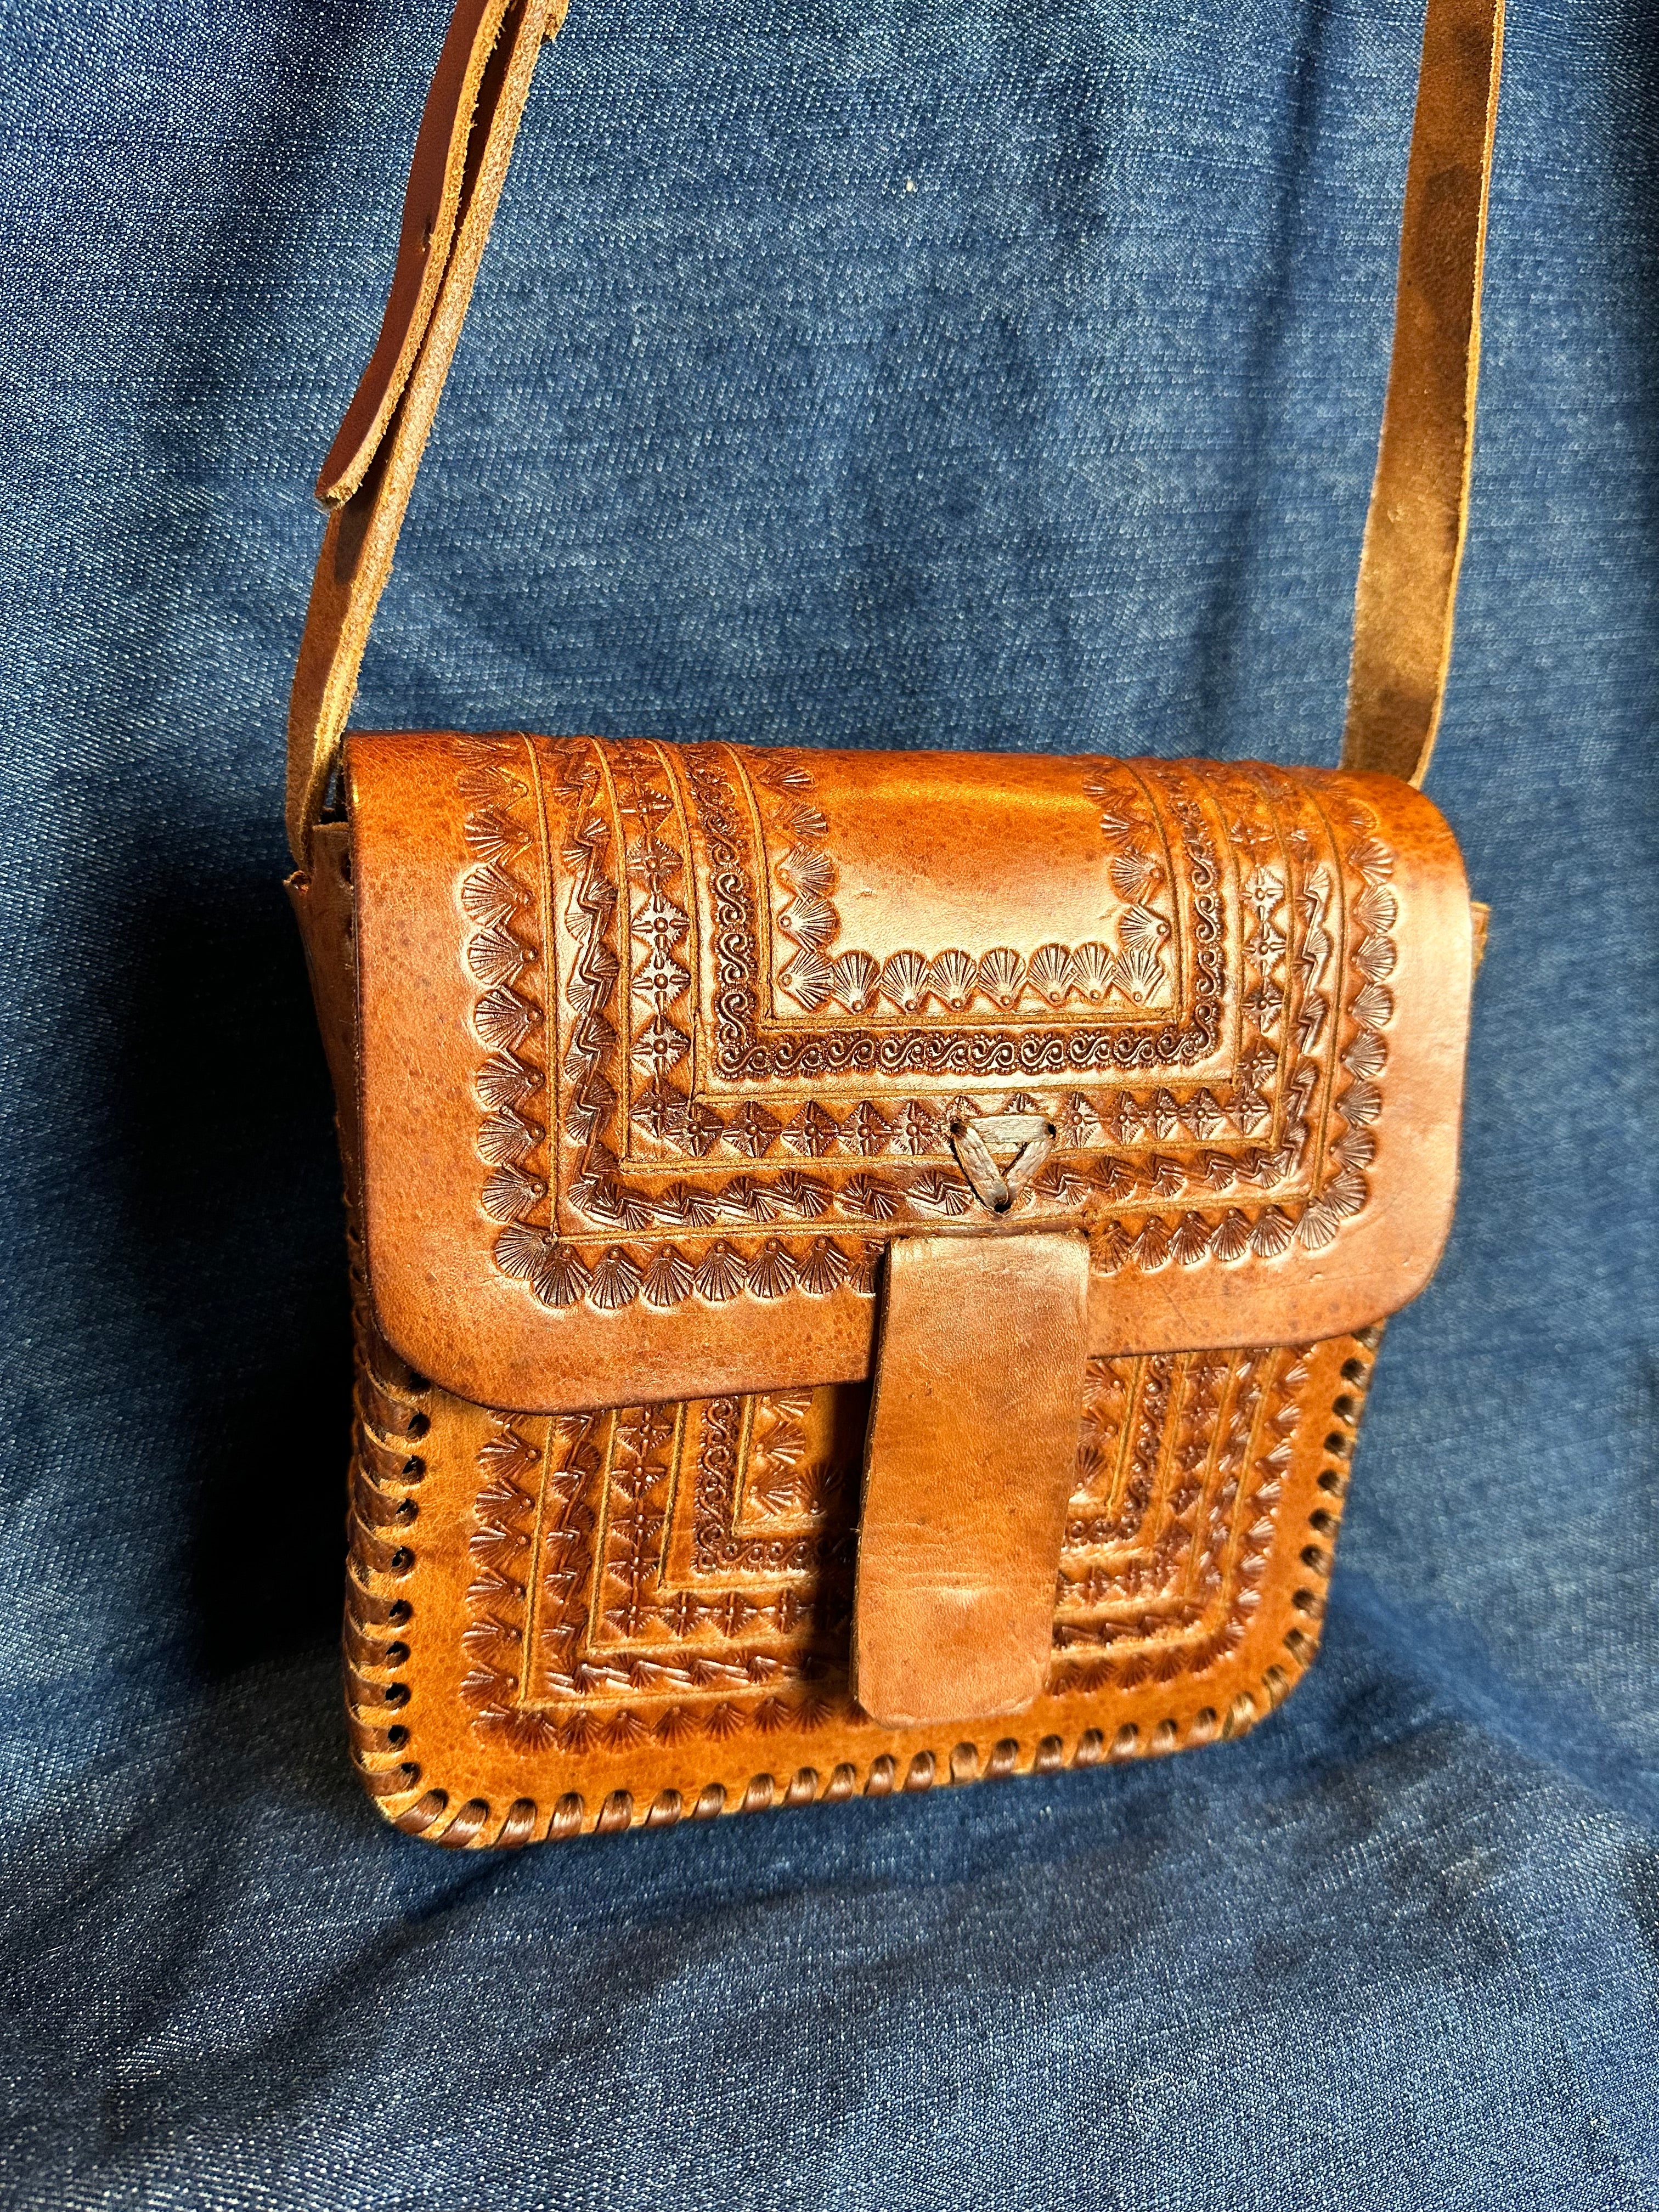 Tooled Leather Bag - Small